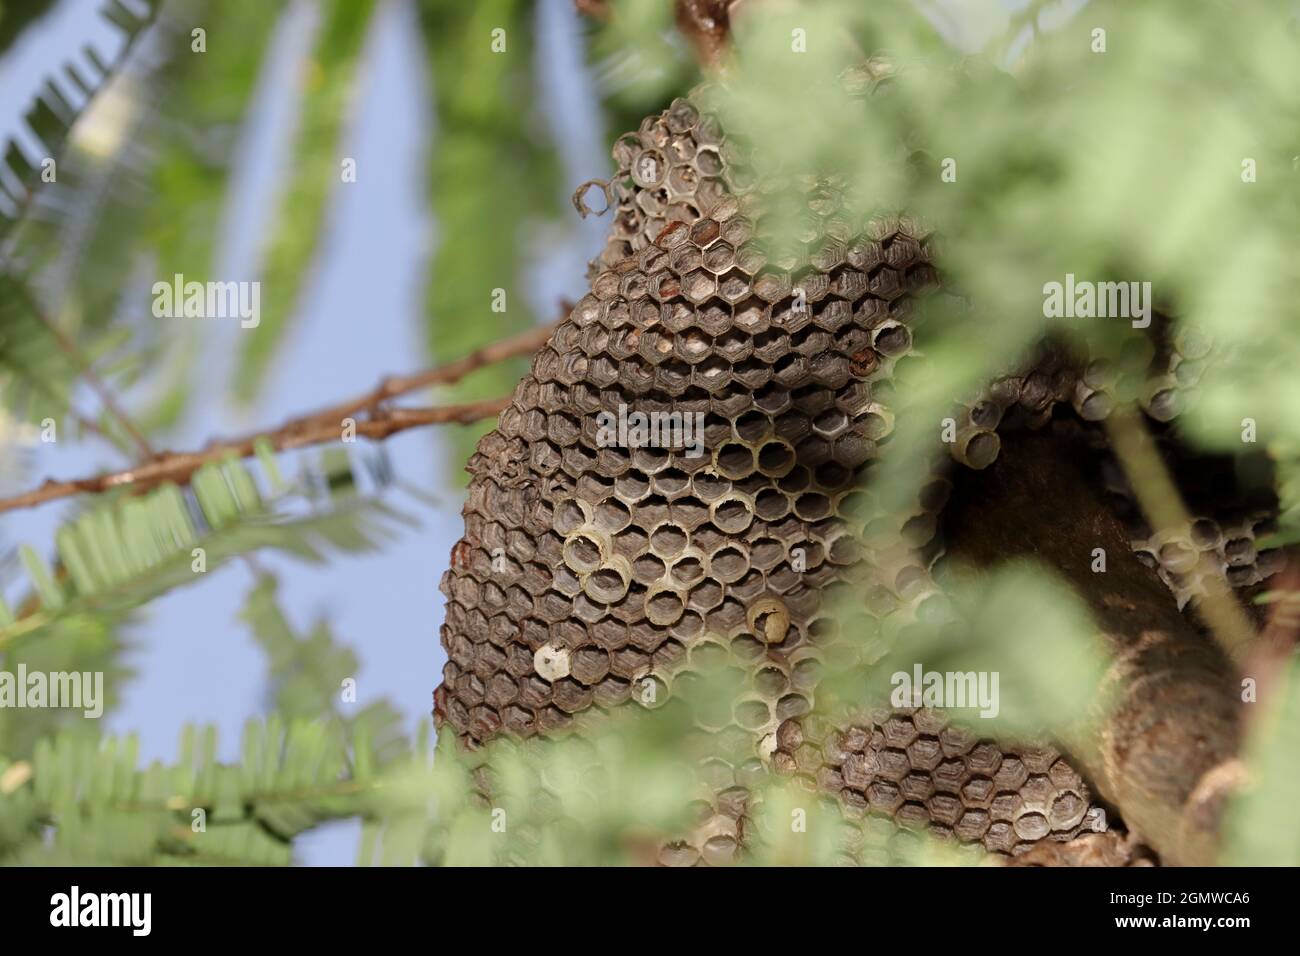 Closeup of An empty nest of a yellow predatory wasp hanging on a tree branch Stock Photo